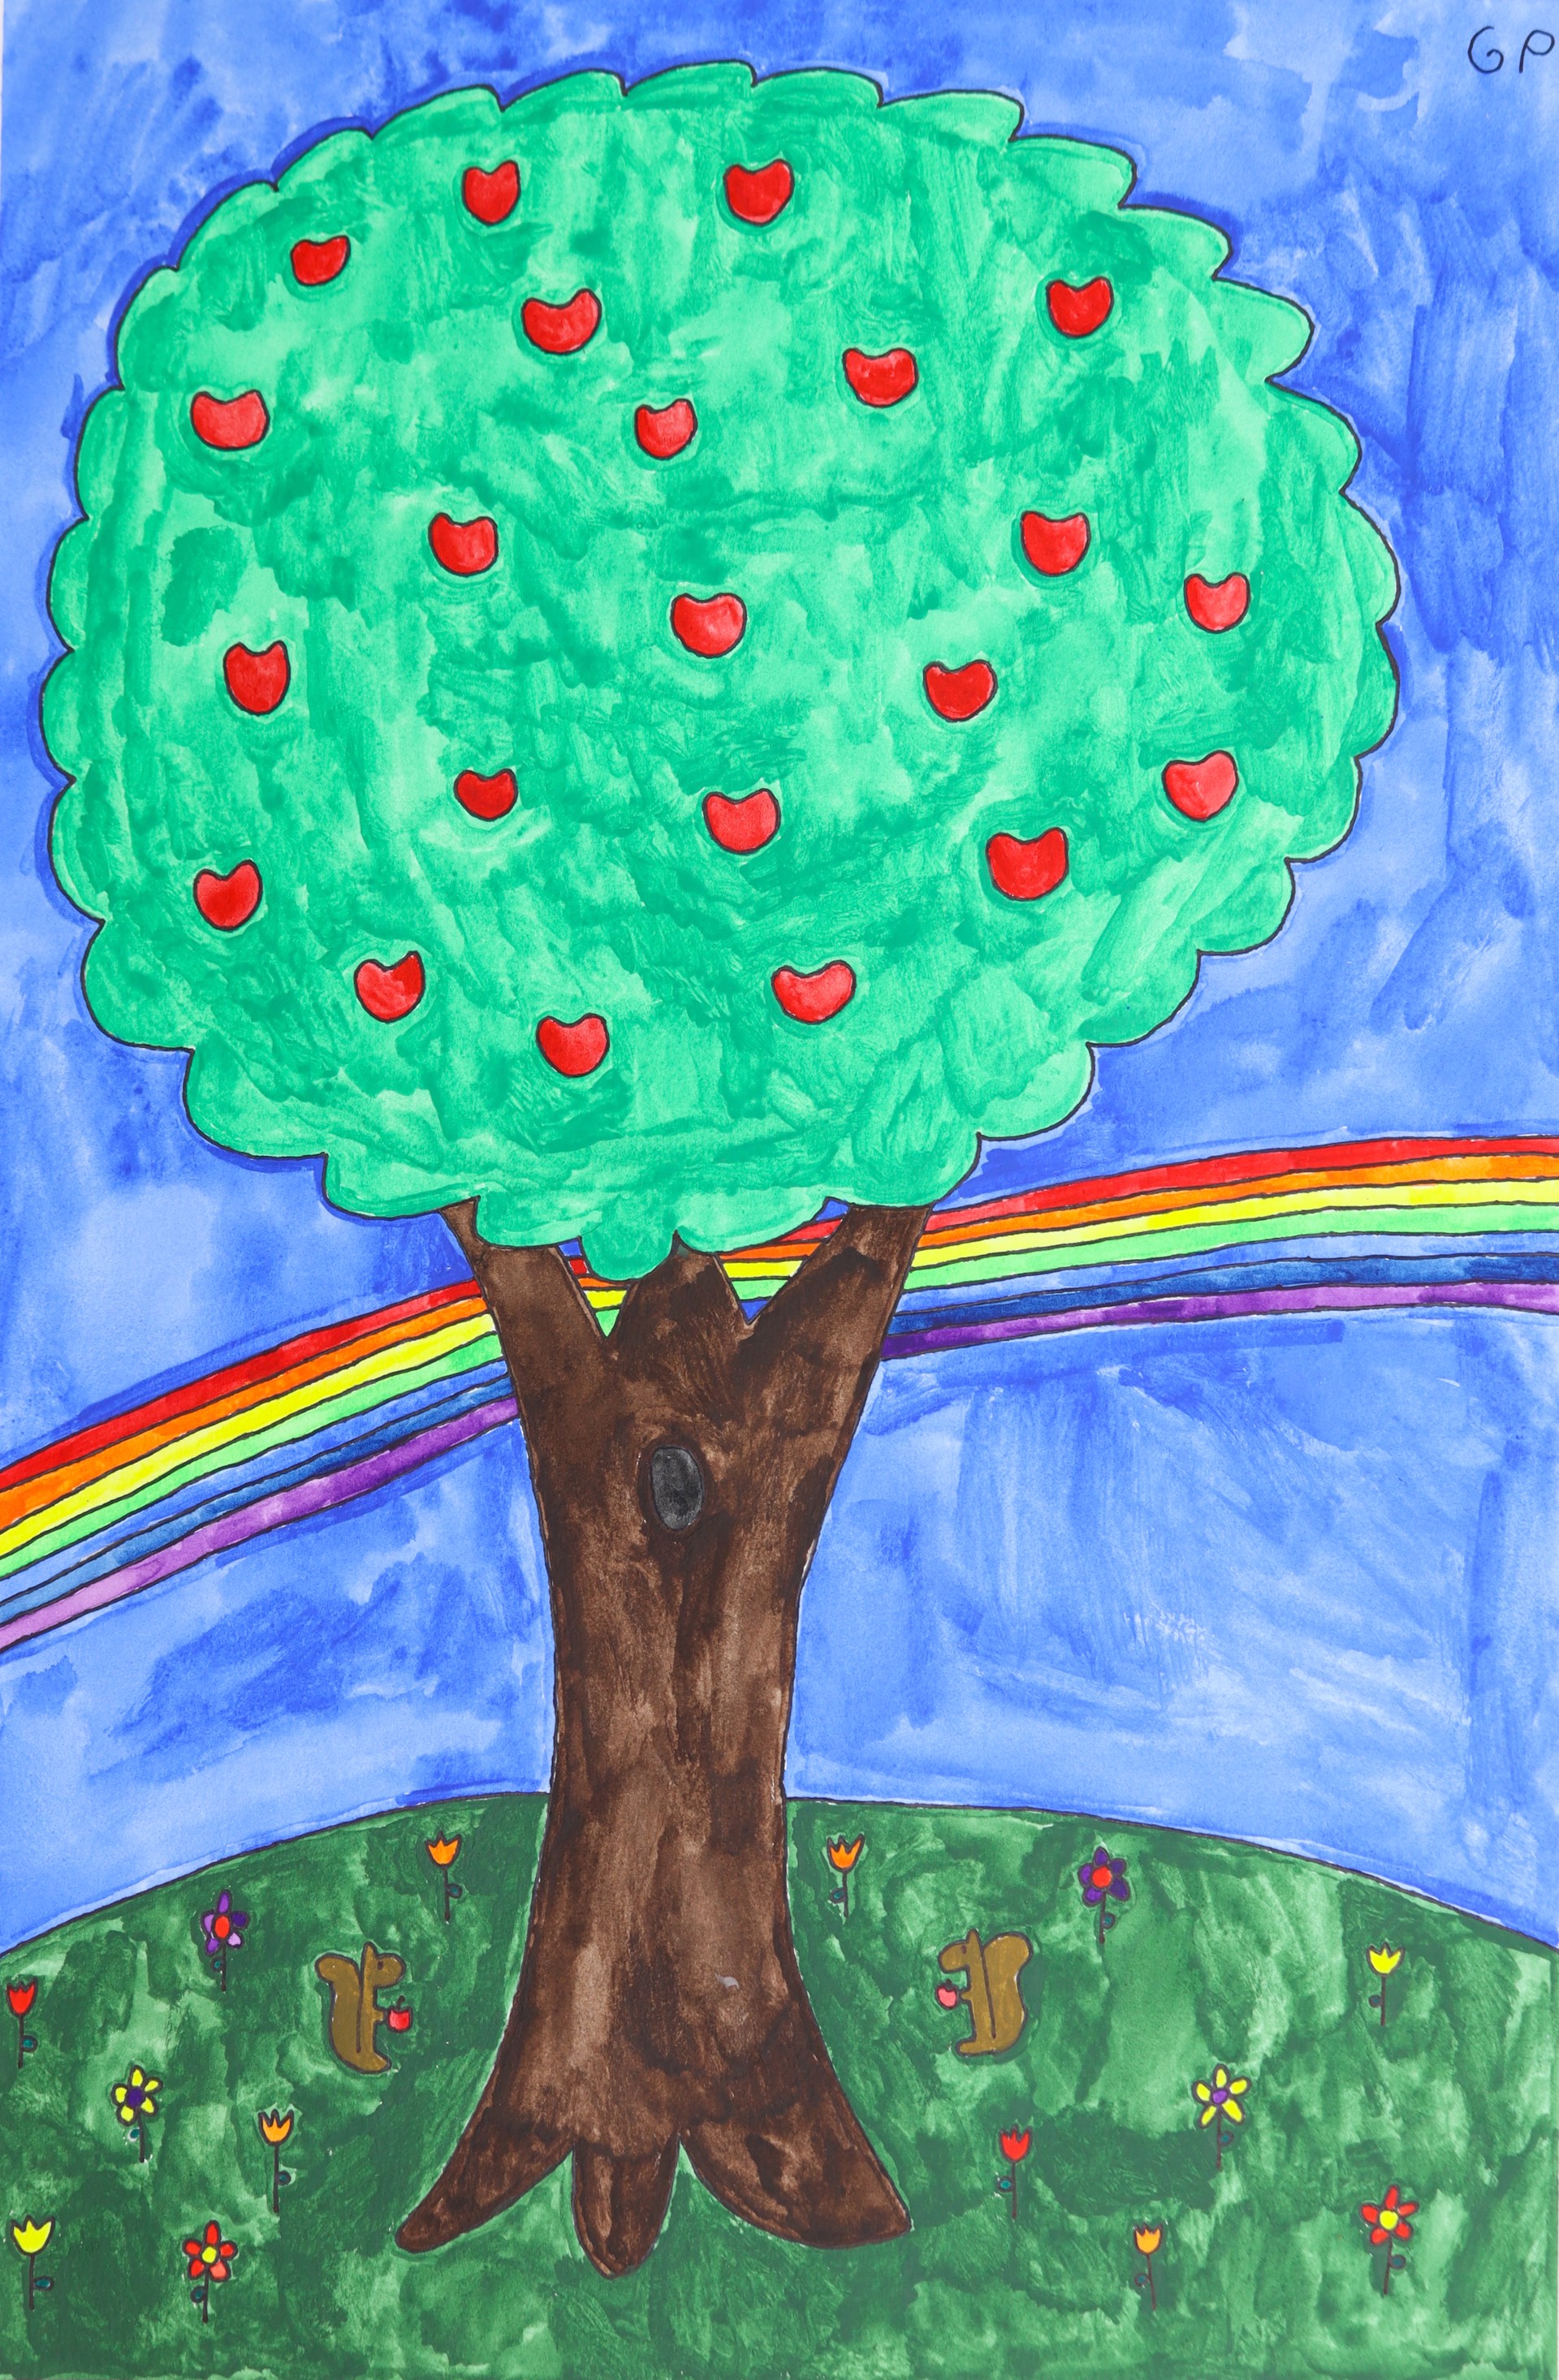 Rainbow and an Apple Tree by Gillian Patterson